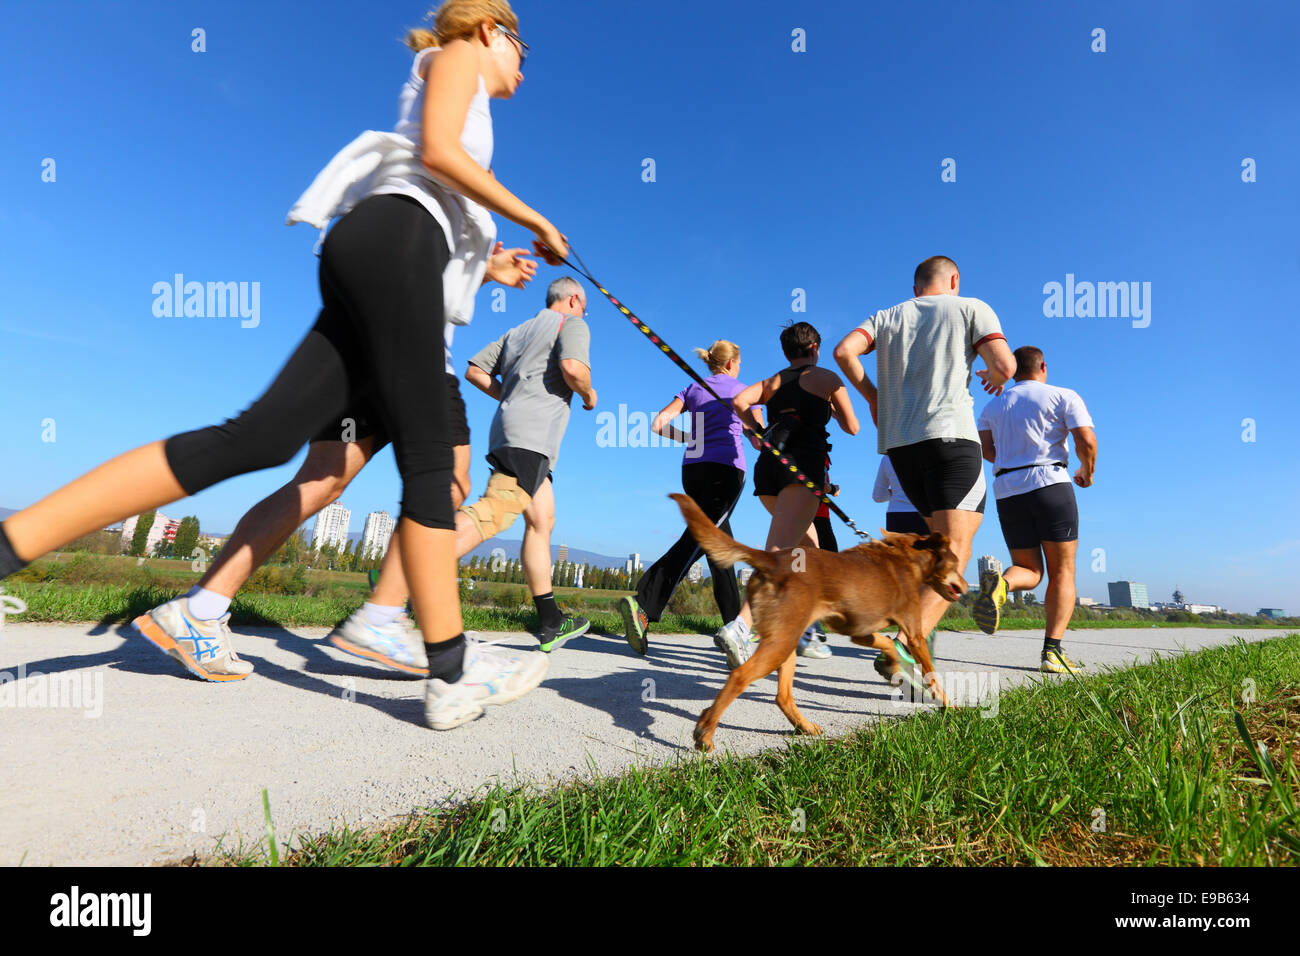 Running - group of people. Stock Photo